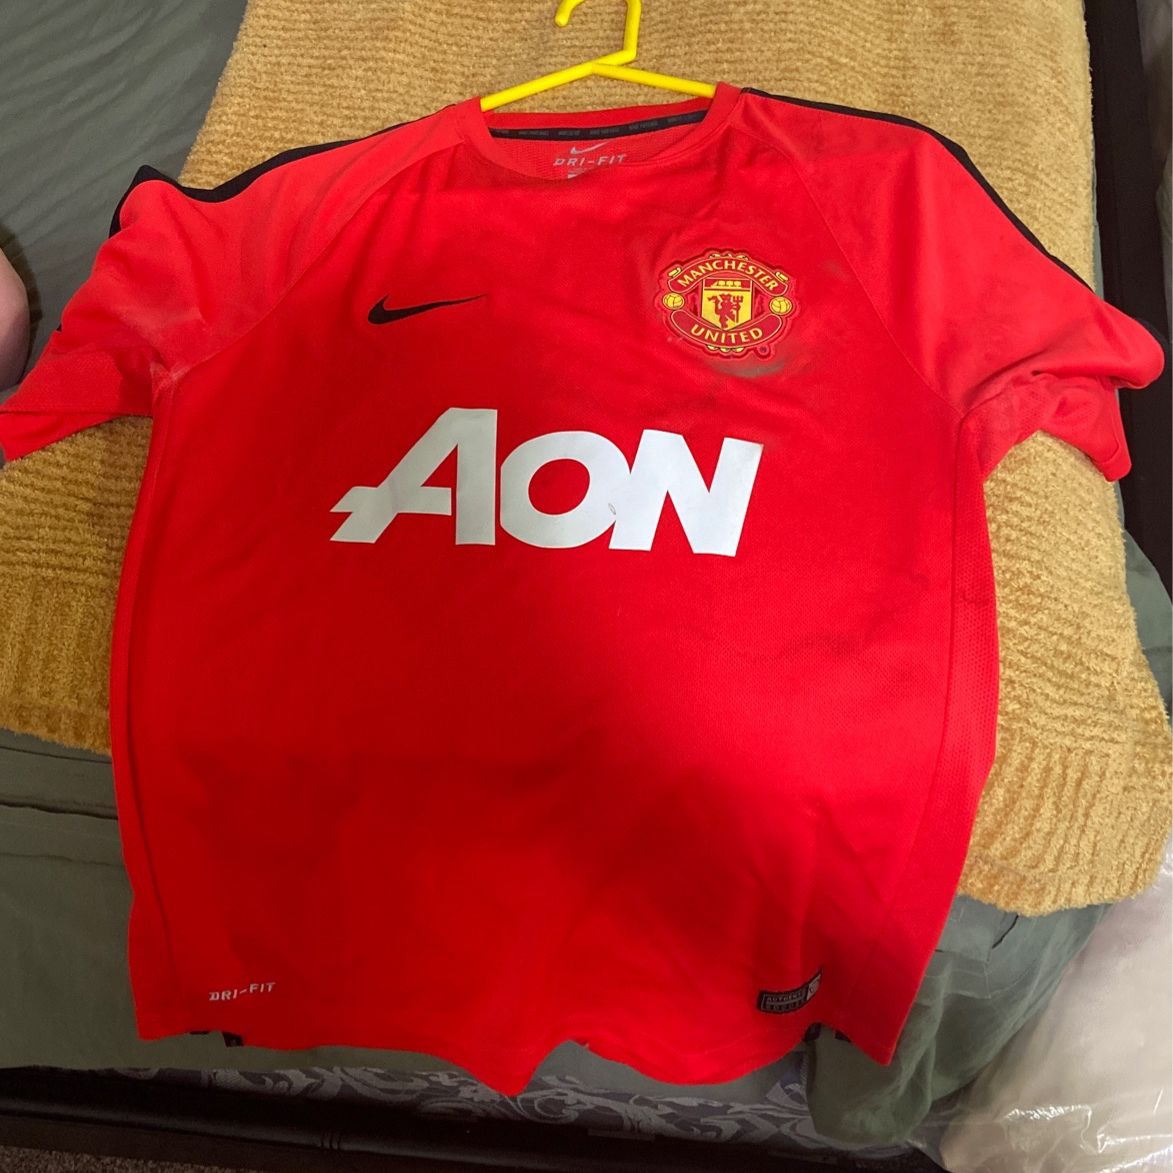 Nike Manchester United Soccer Jersey Size Large Fits A Medium